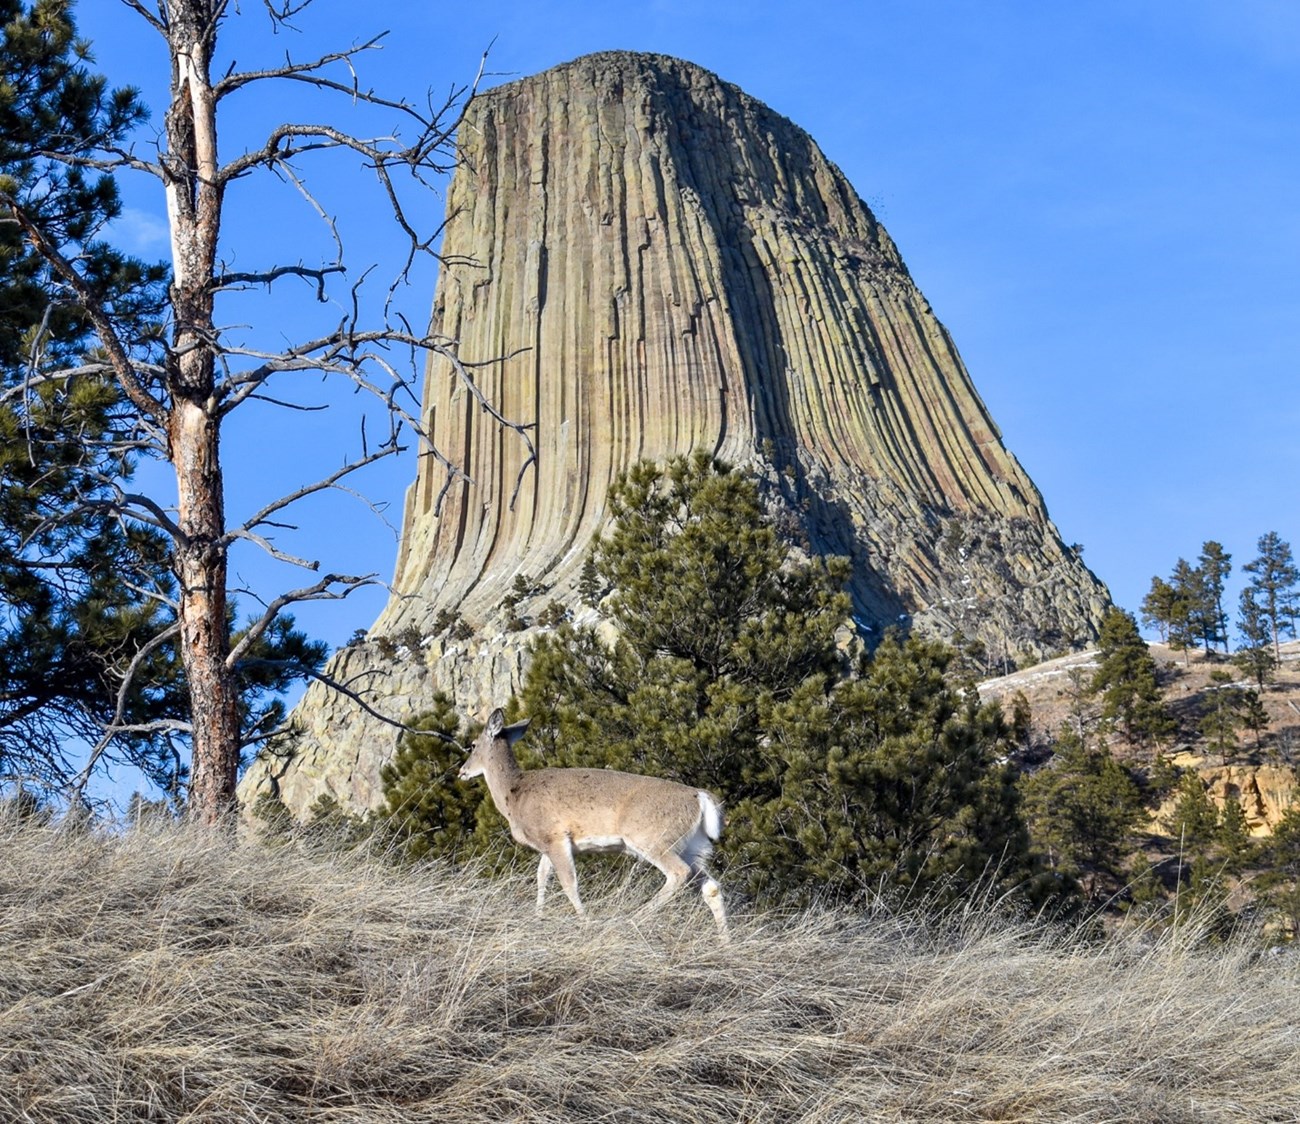 A female White-Tailed Deer standing in front of a large rocky outcropping on top of a hill with grass and pine trees.